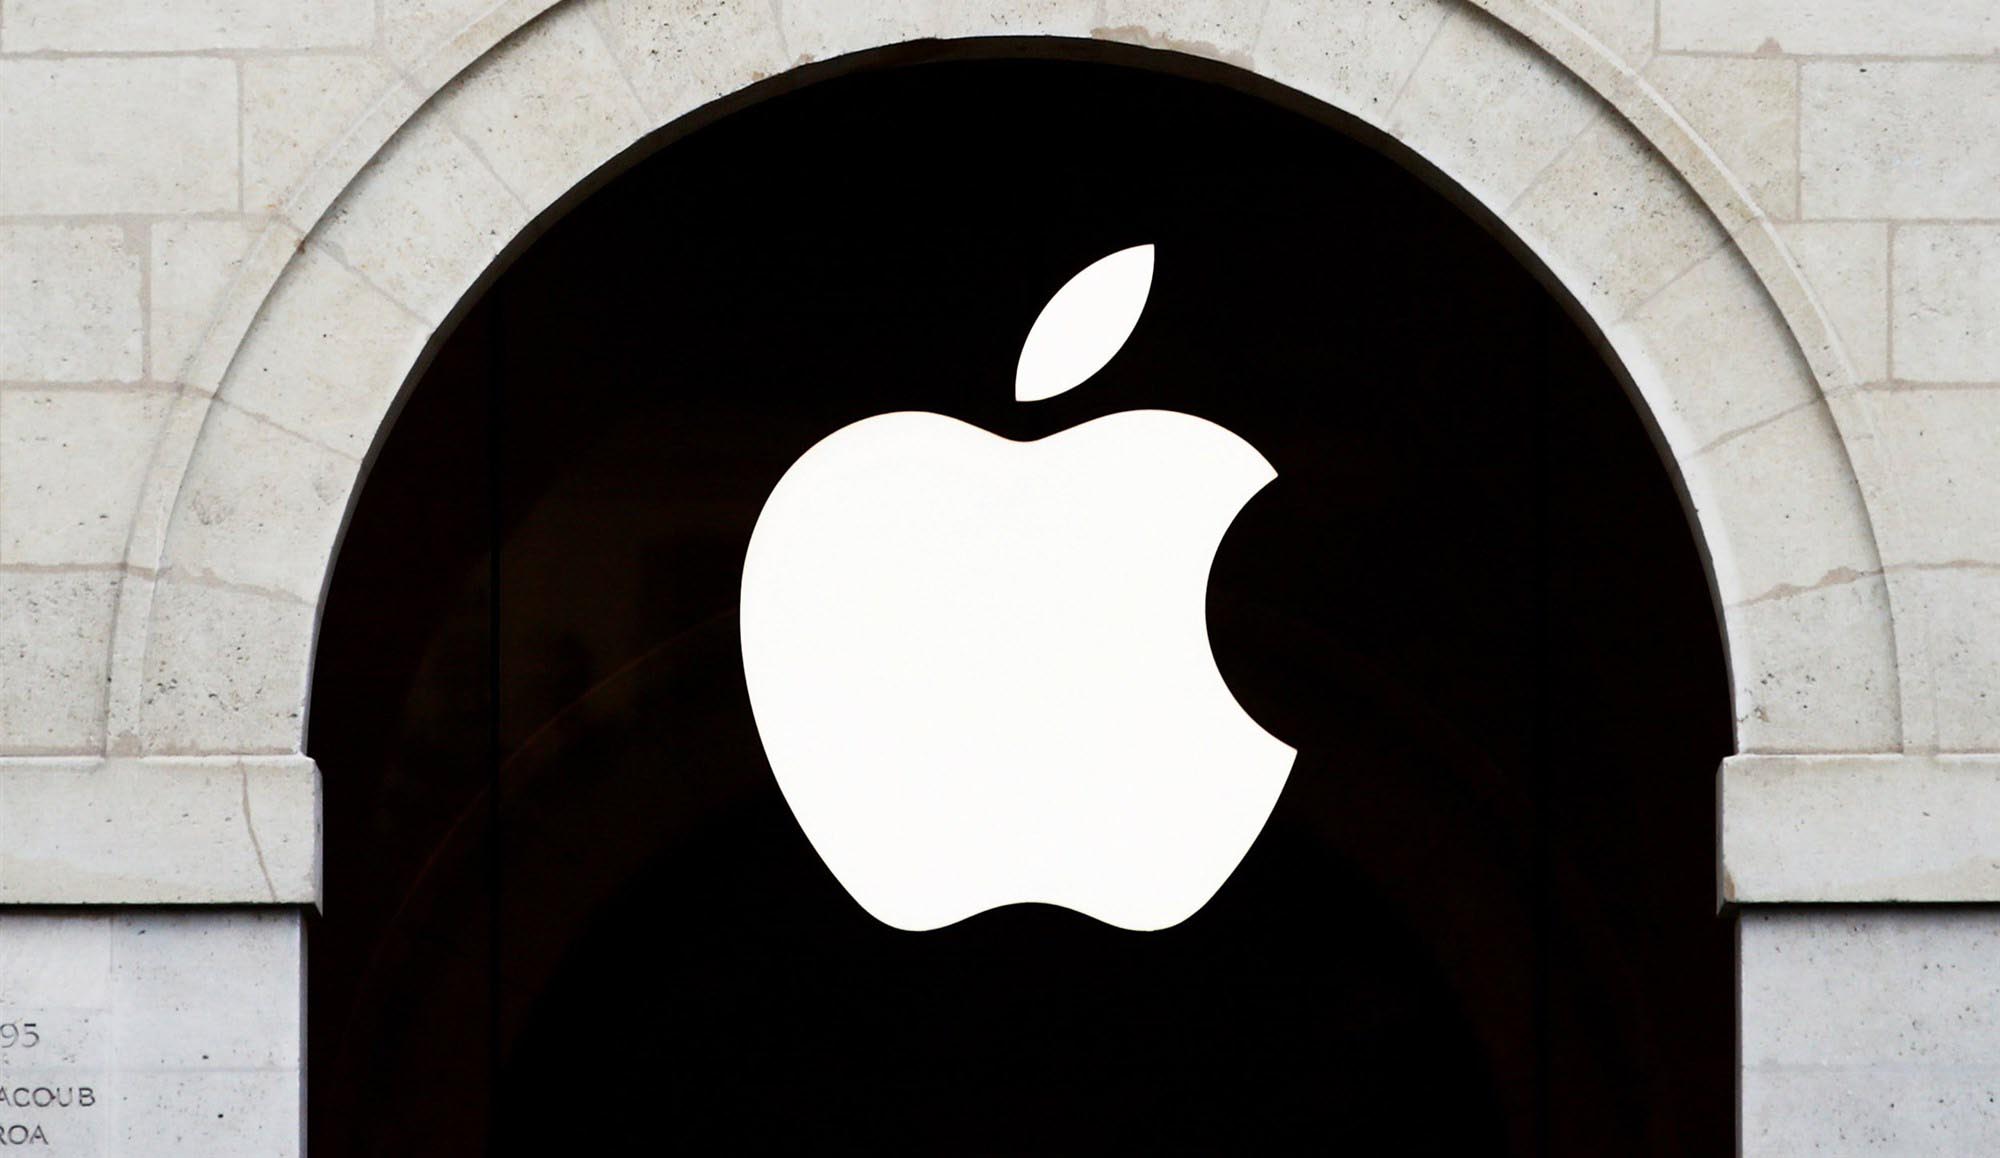 Hackers Try To Extort Apple After Stealing Files From Company That Makes Its Products